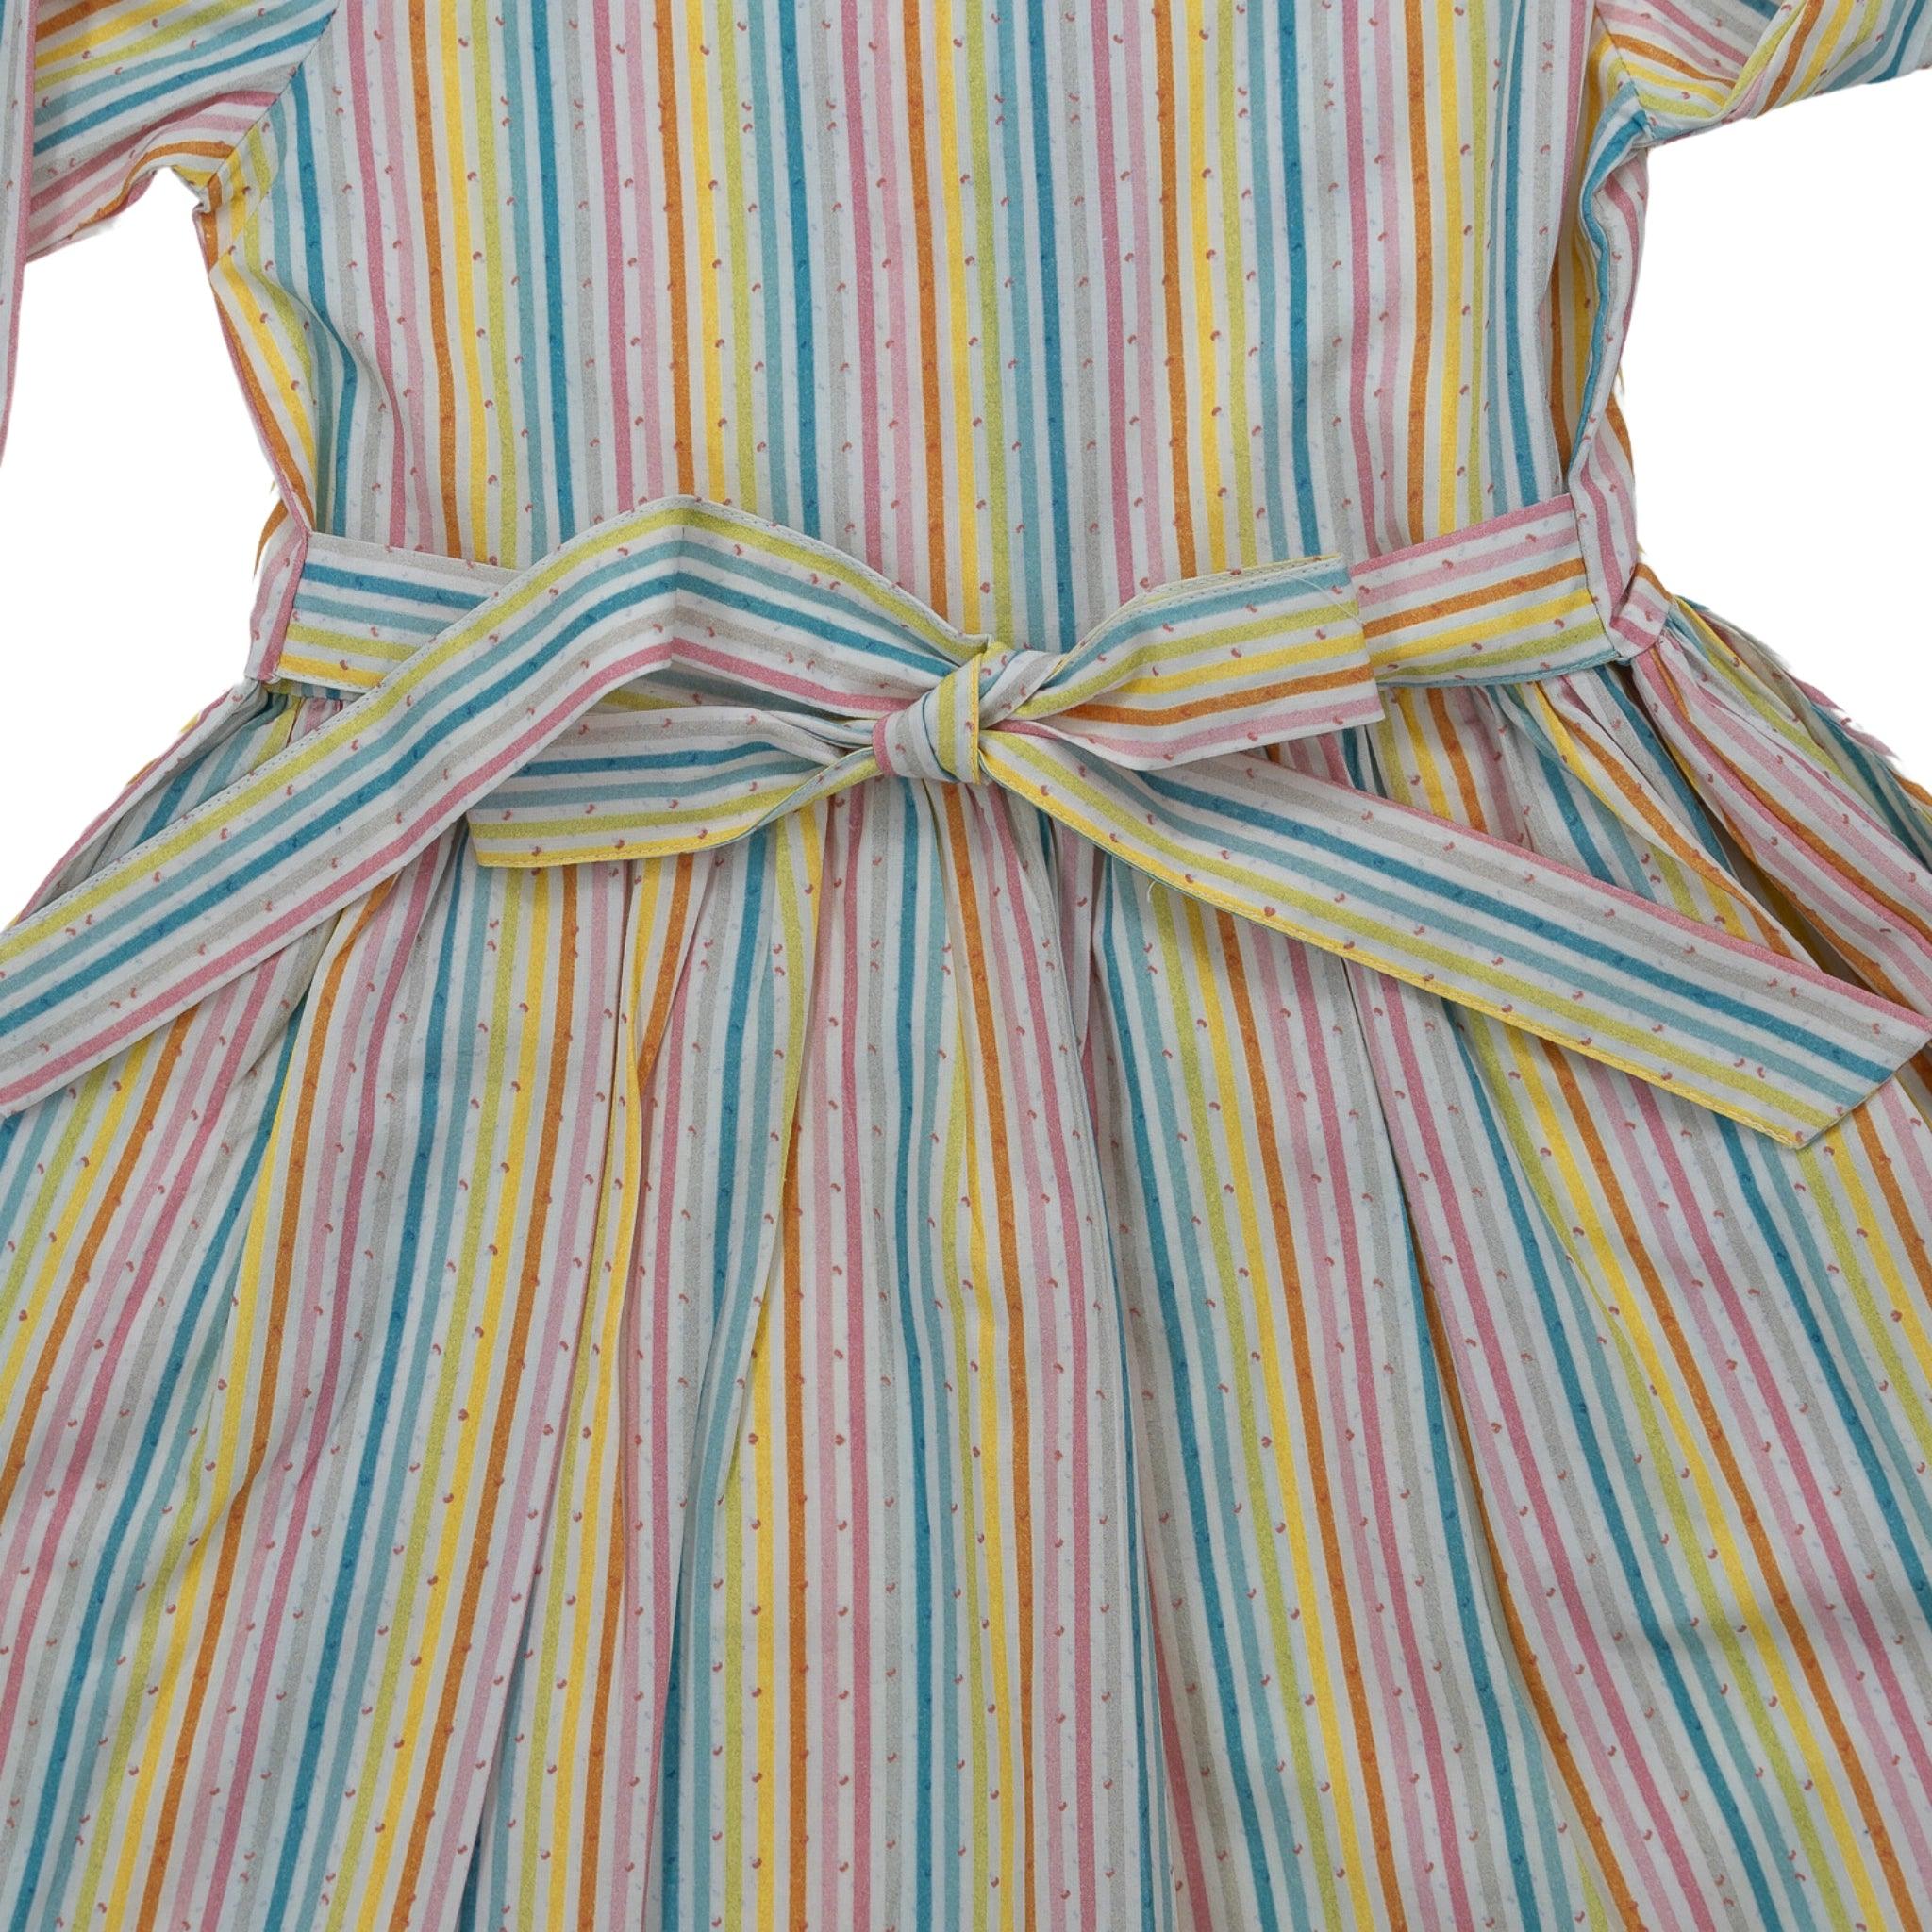 A colorful striped dress with a bow at the back, featuring vertical pastel stripes in yellow, pink, blue, and green, designed as part of Karee's sustainable fashion initiative.